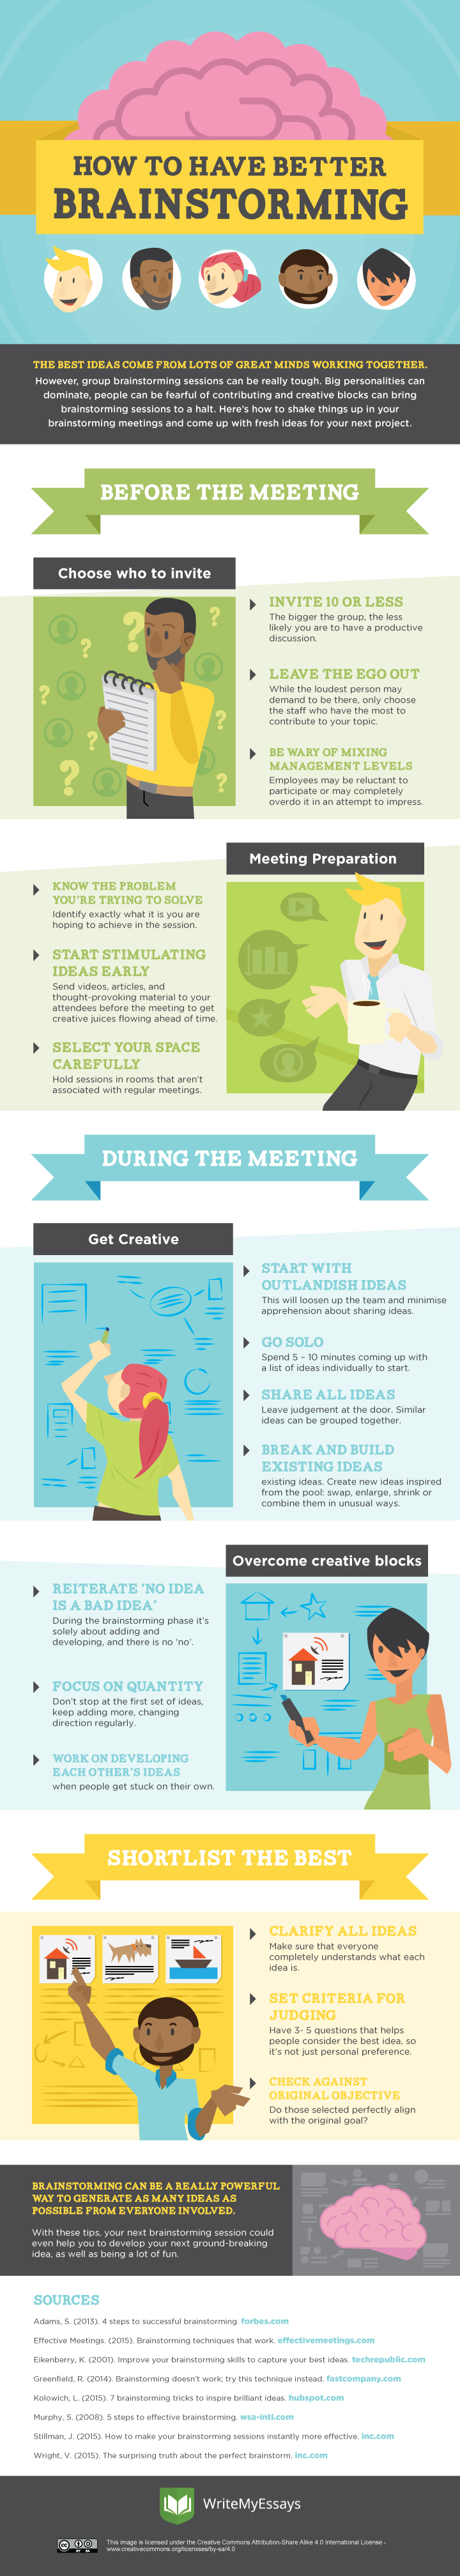 how-to-have-better-brainstorming